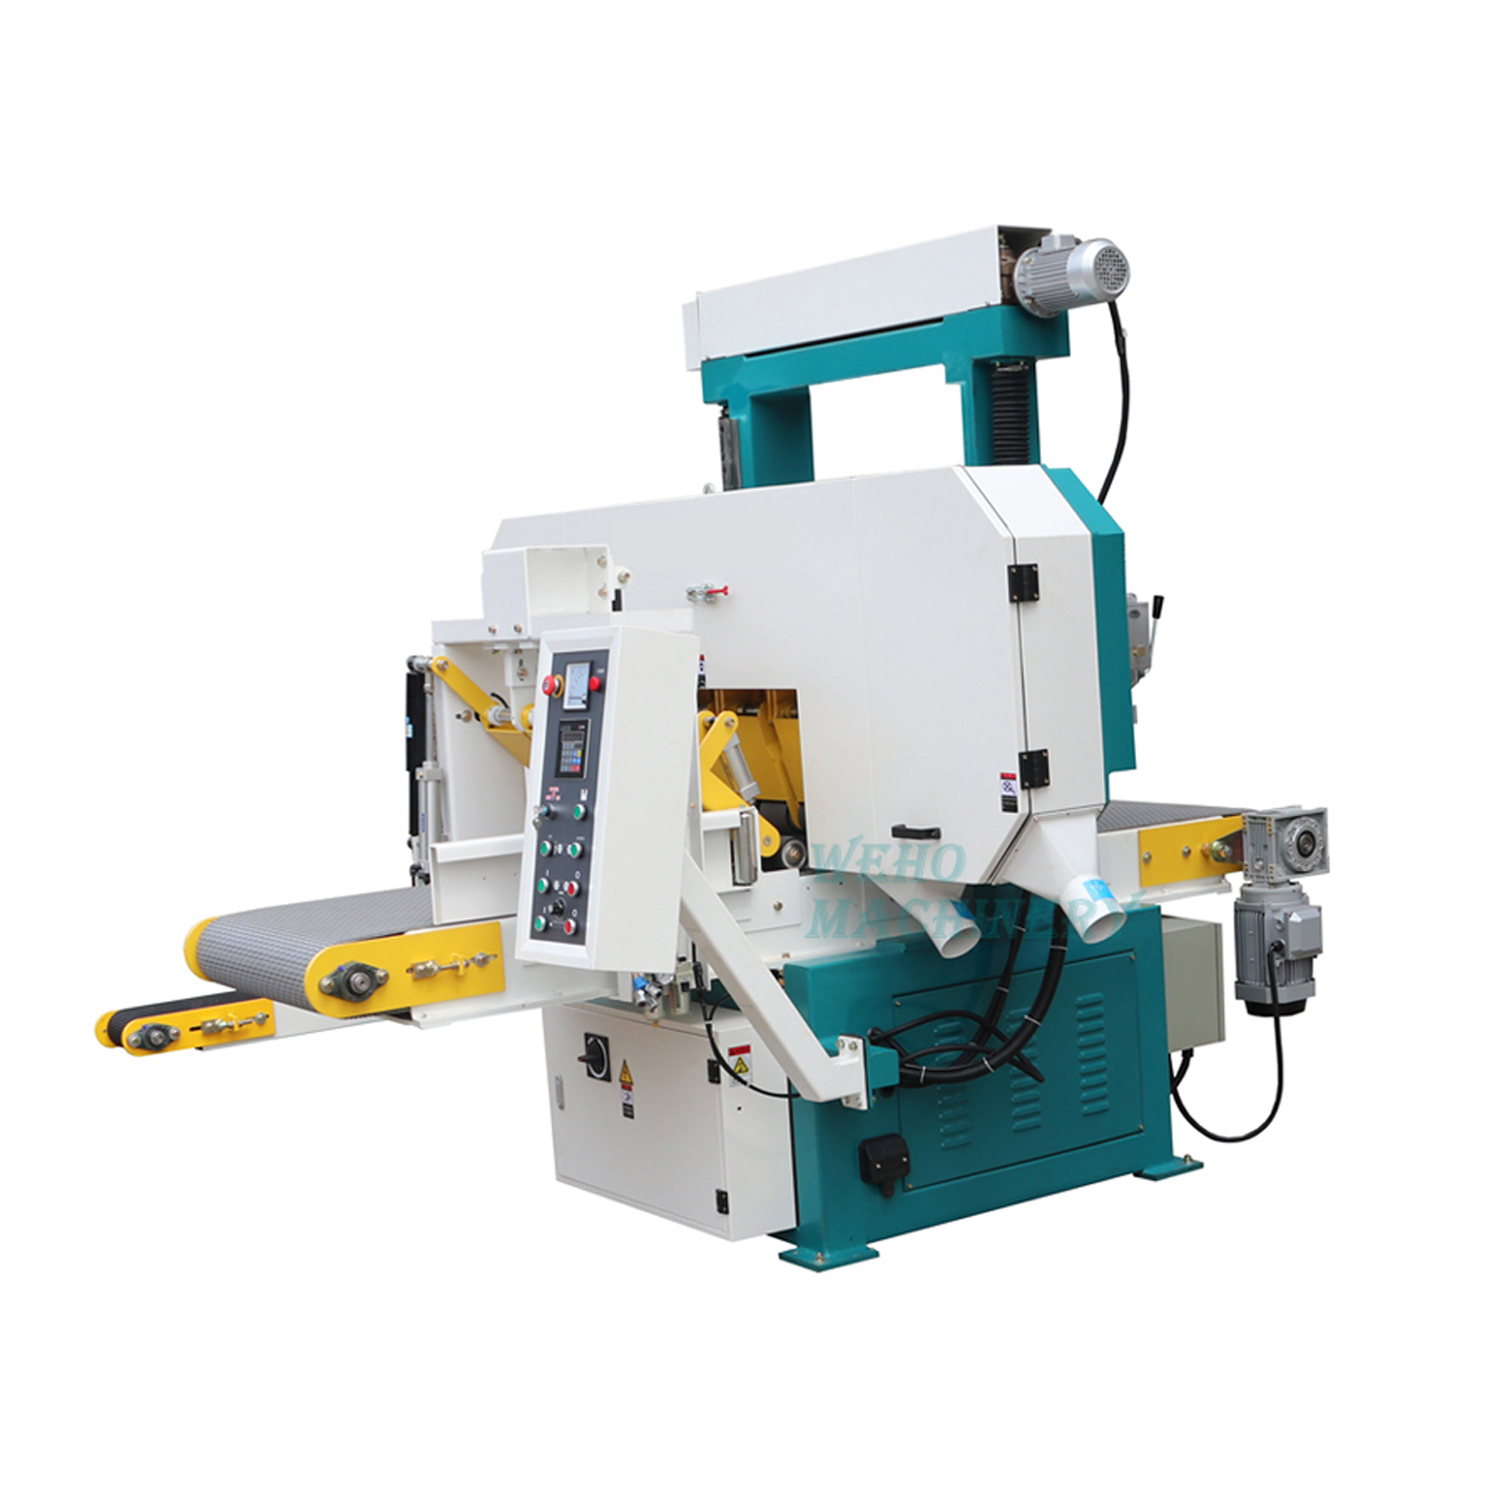 CNC woodworking horizontal band saw for wood resaw | Cnc Band Saw For Wood